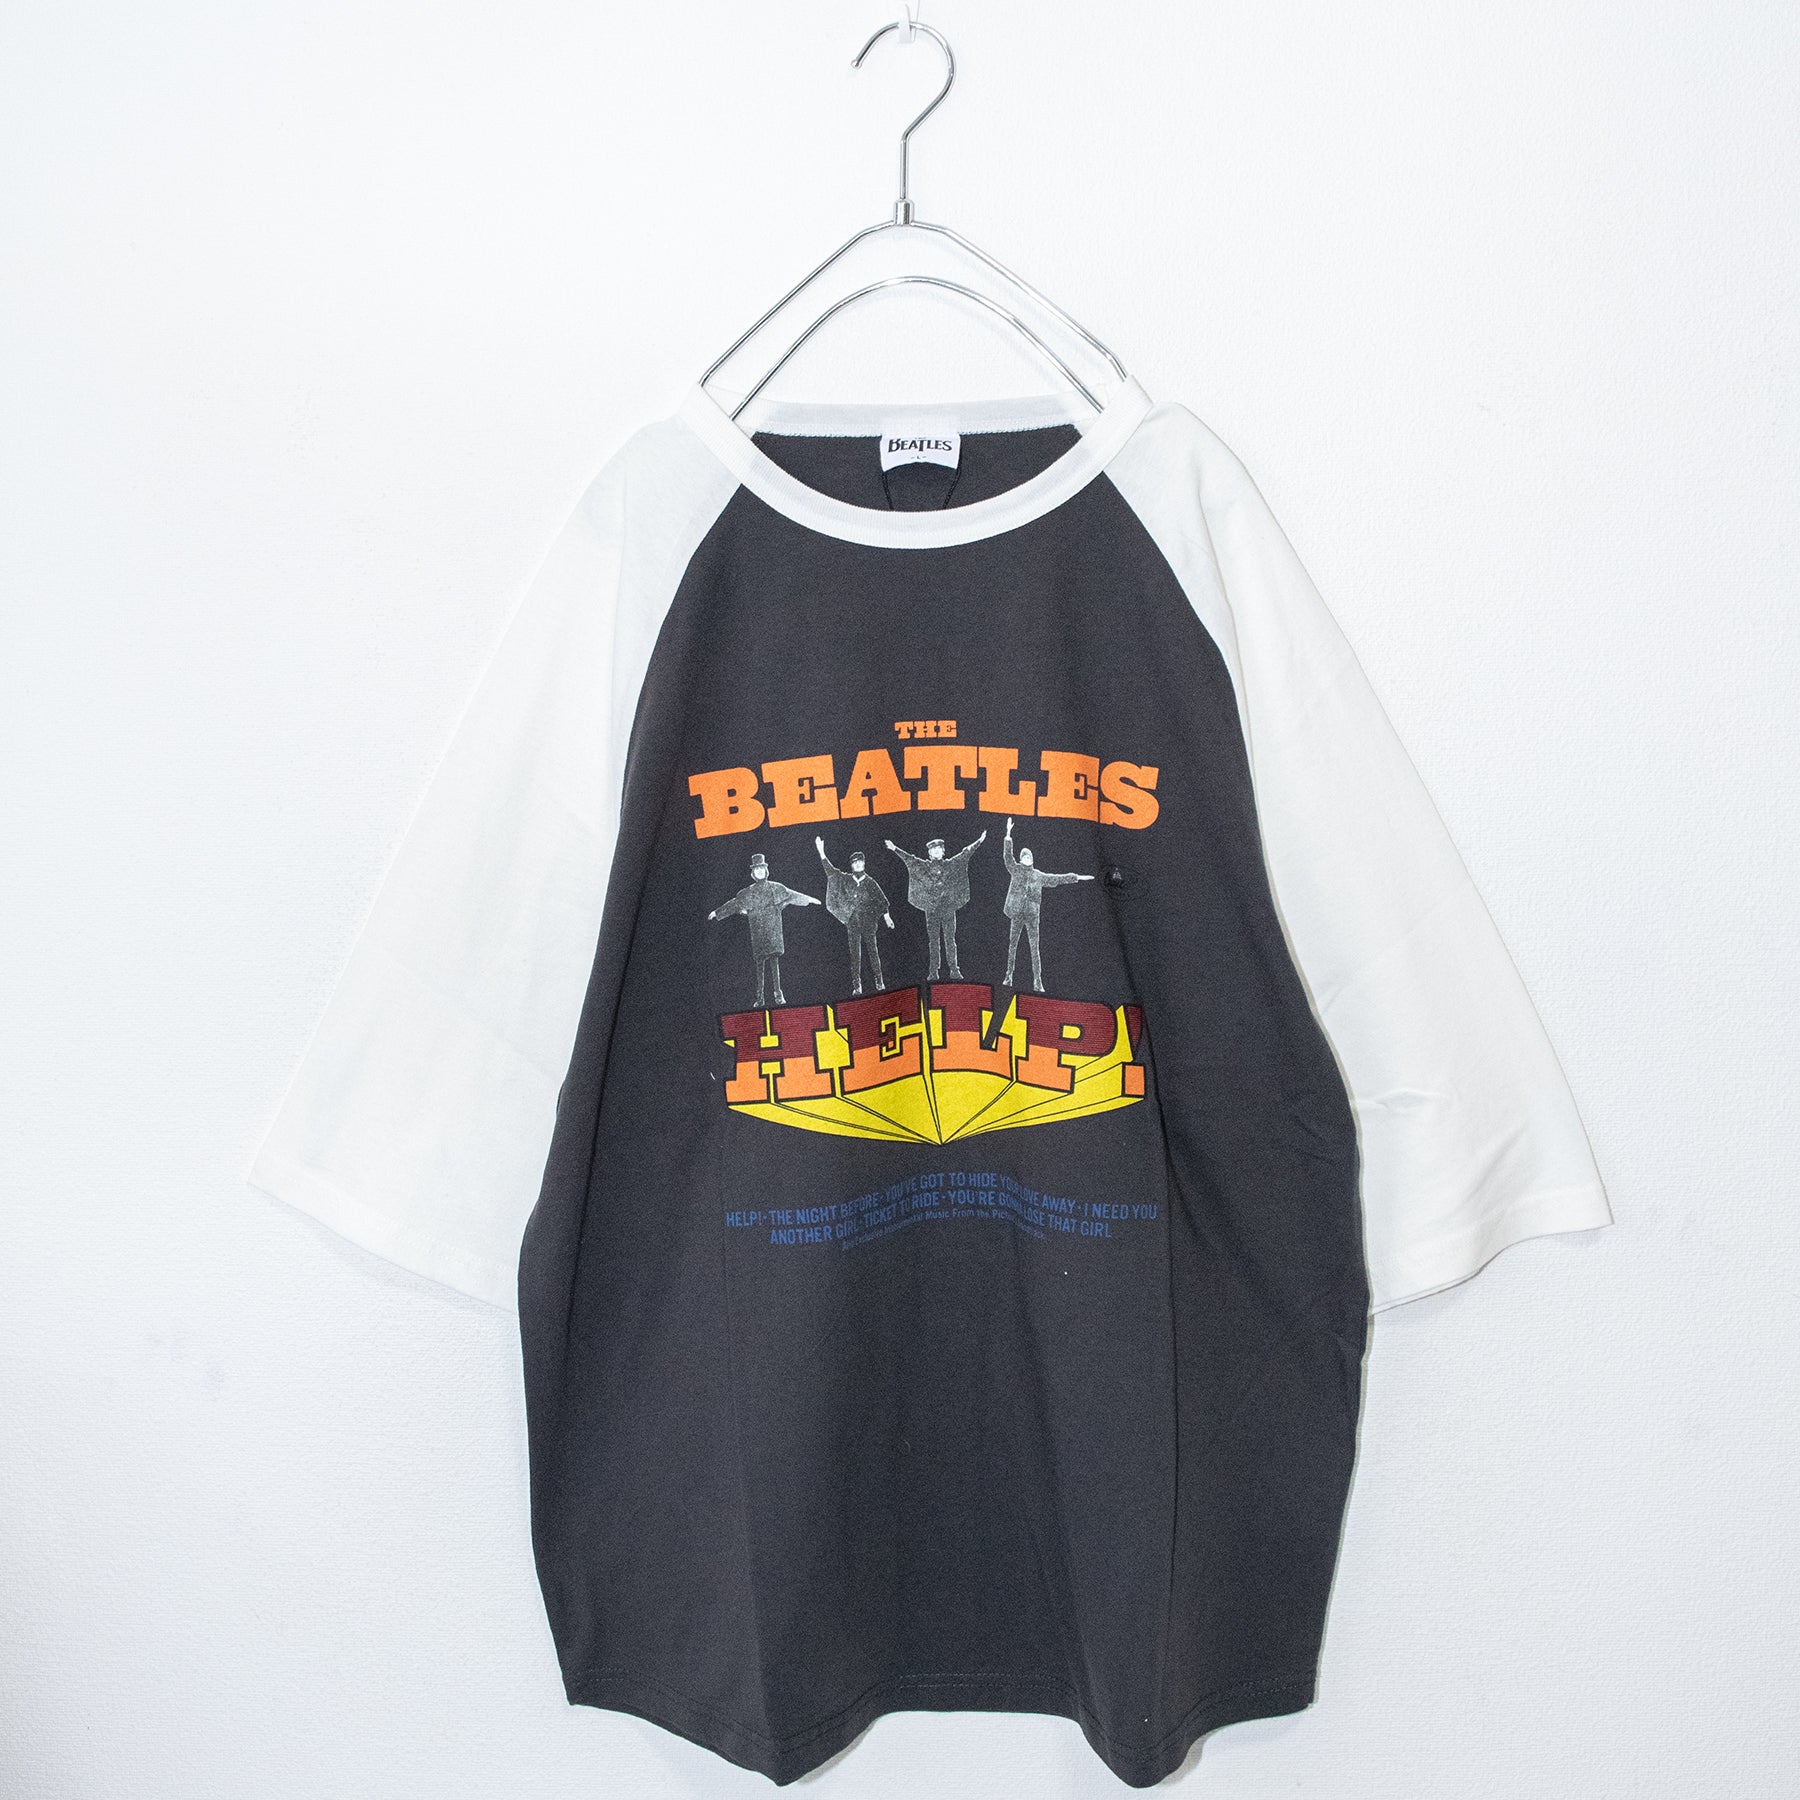 THE BEATLES Raglan S/S T-shirt (2 color) - YOUAREMYPOISON